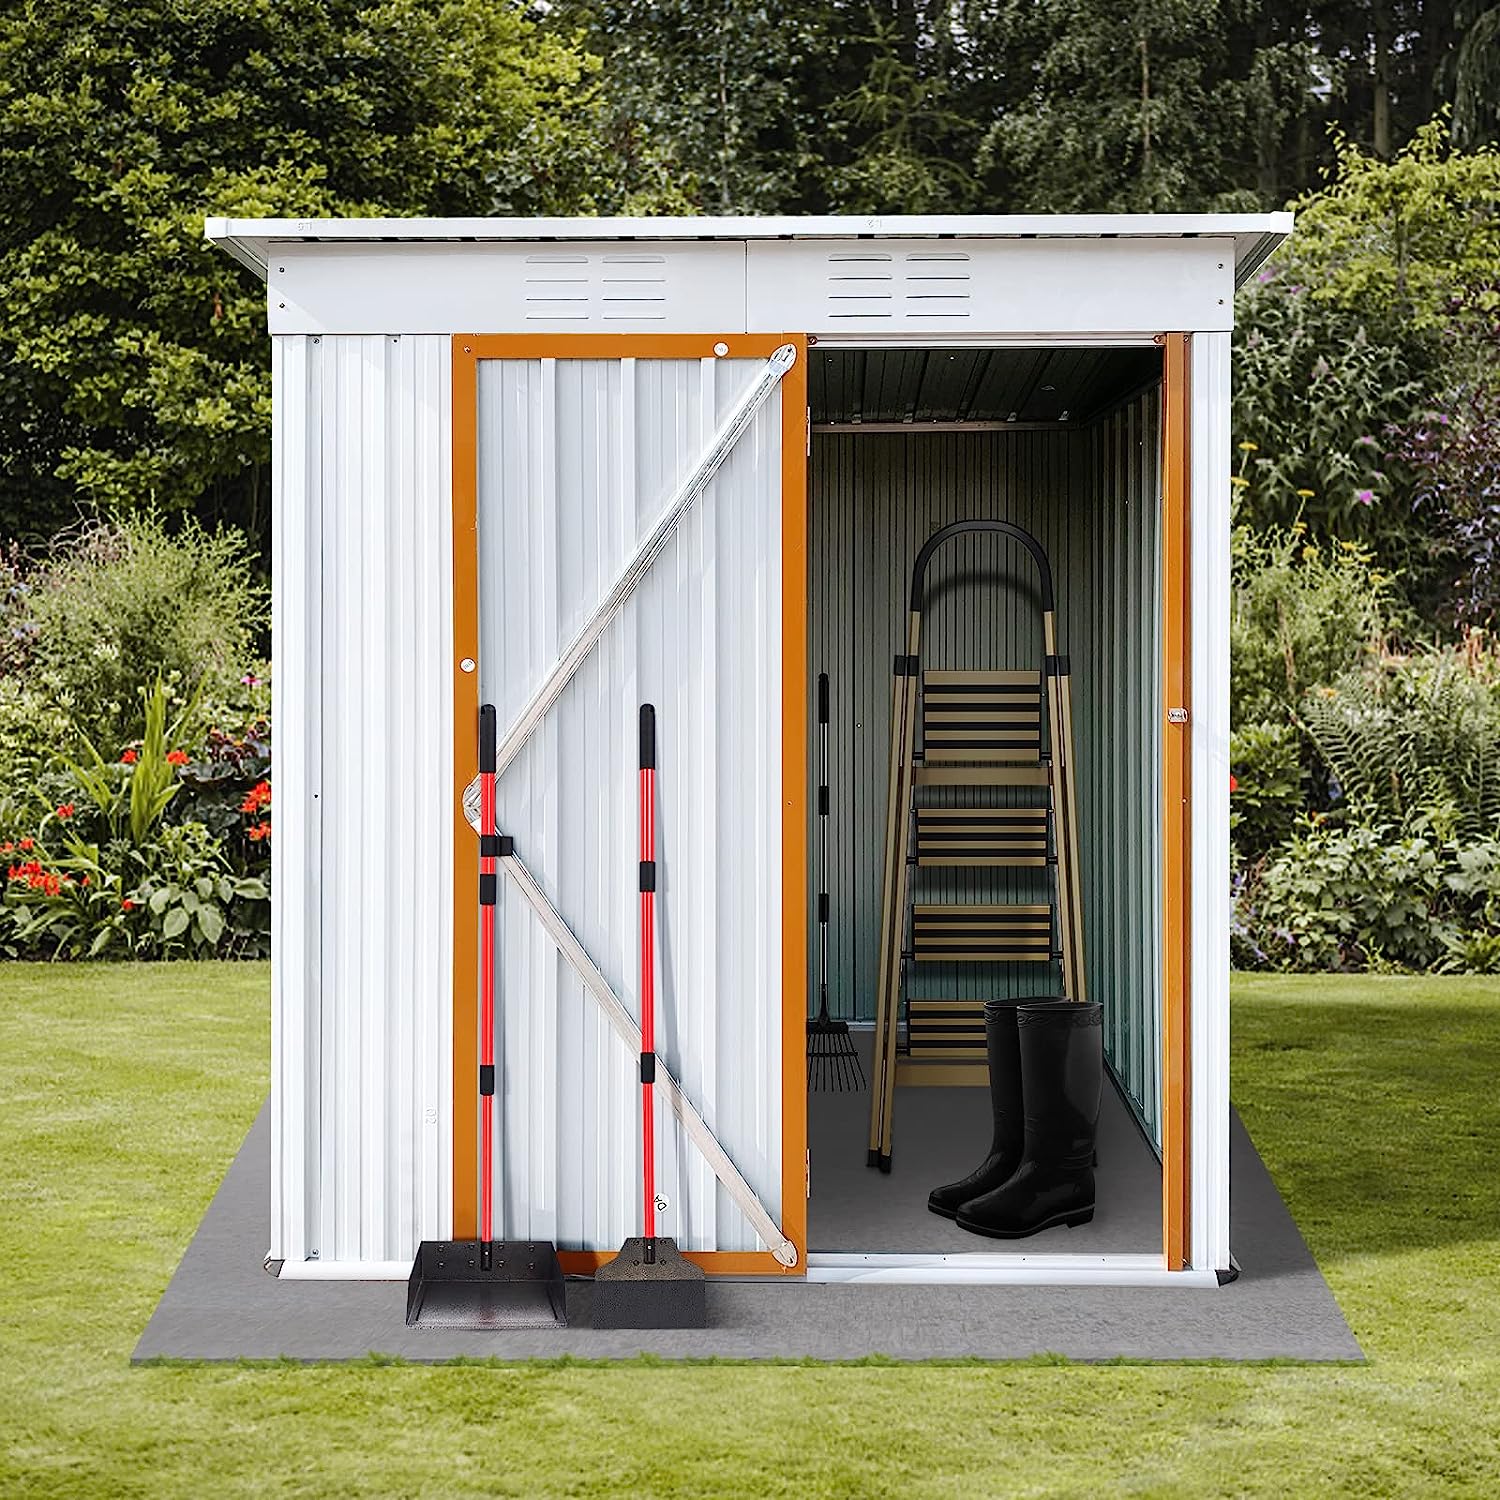 YOPTO 5x4 storage shed front view with open door